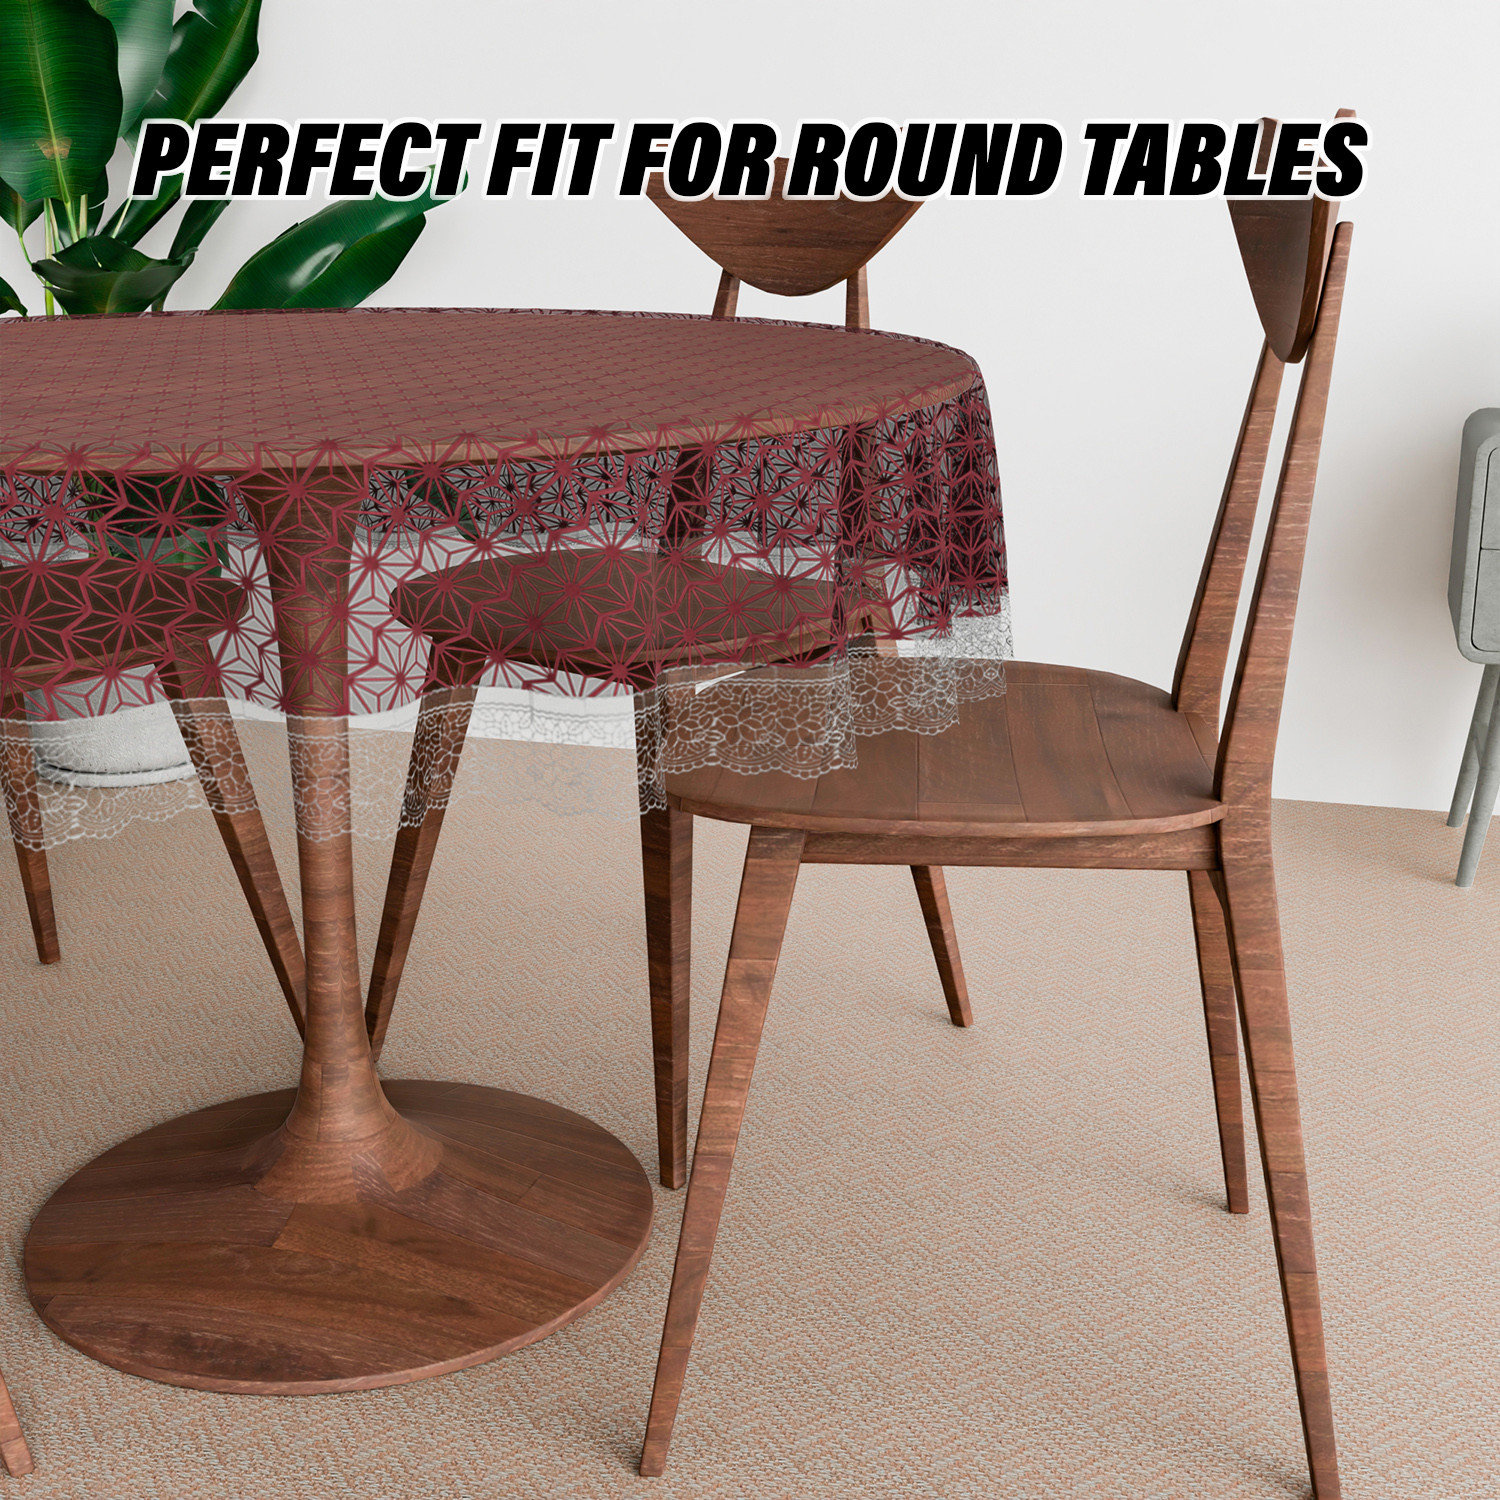 Kuber Industries Round Table Cover | PVC Table Cloth for Round Tables | 4 Seater Round Table Cloth | Self Star Kitchen Dining Tablecloth | Tabletop Cover | 60 Inch | Brown